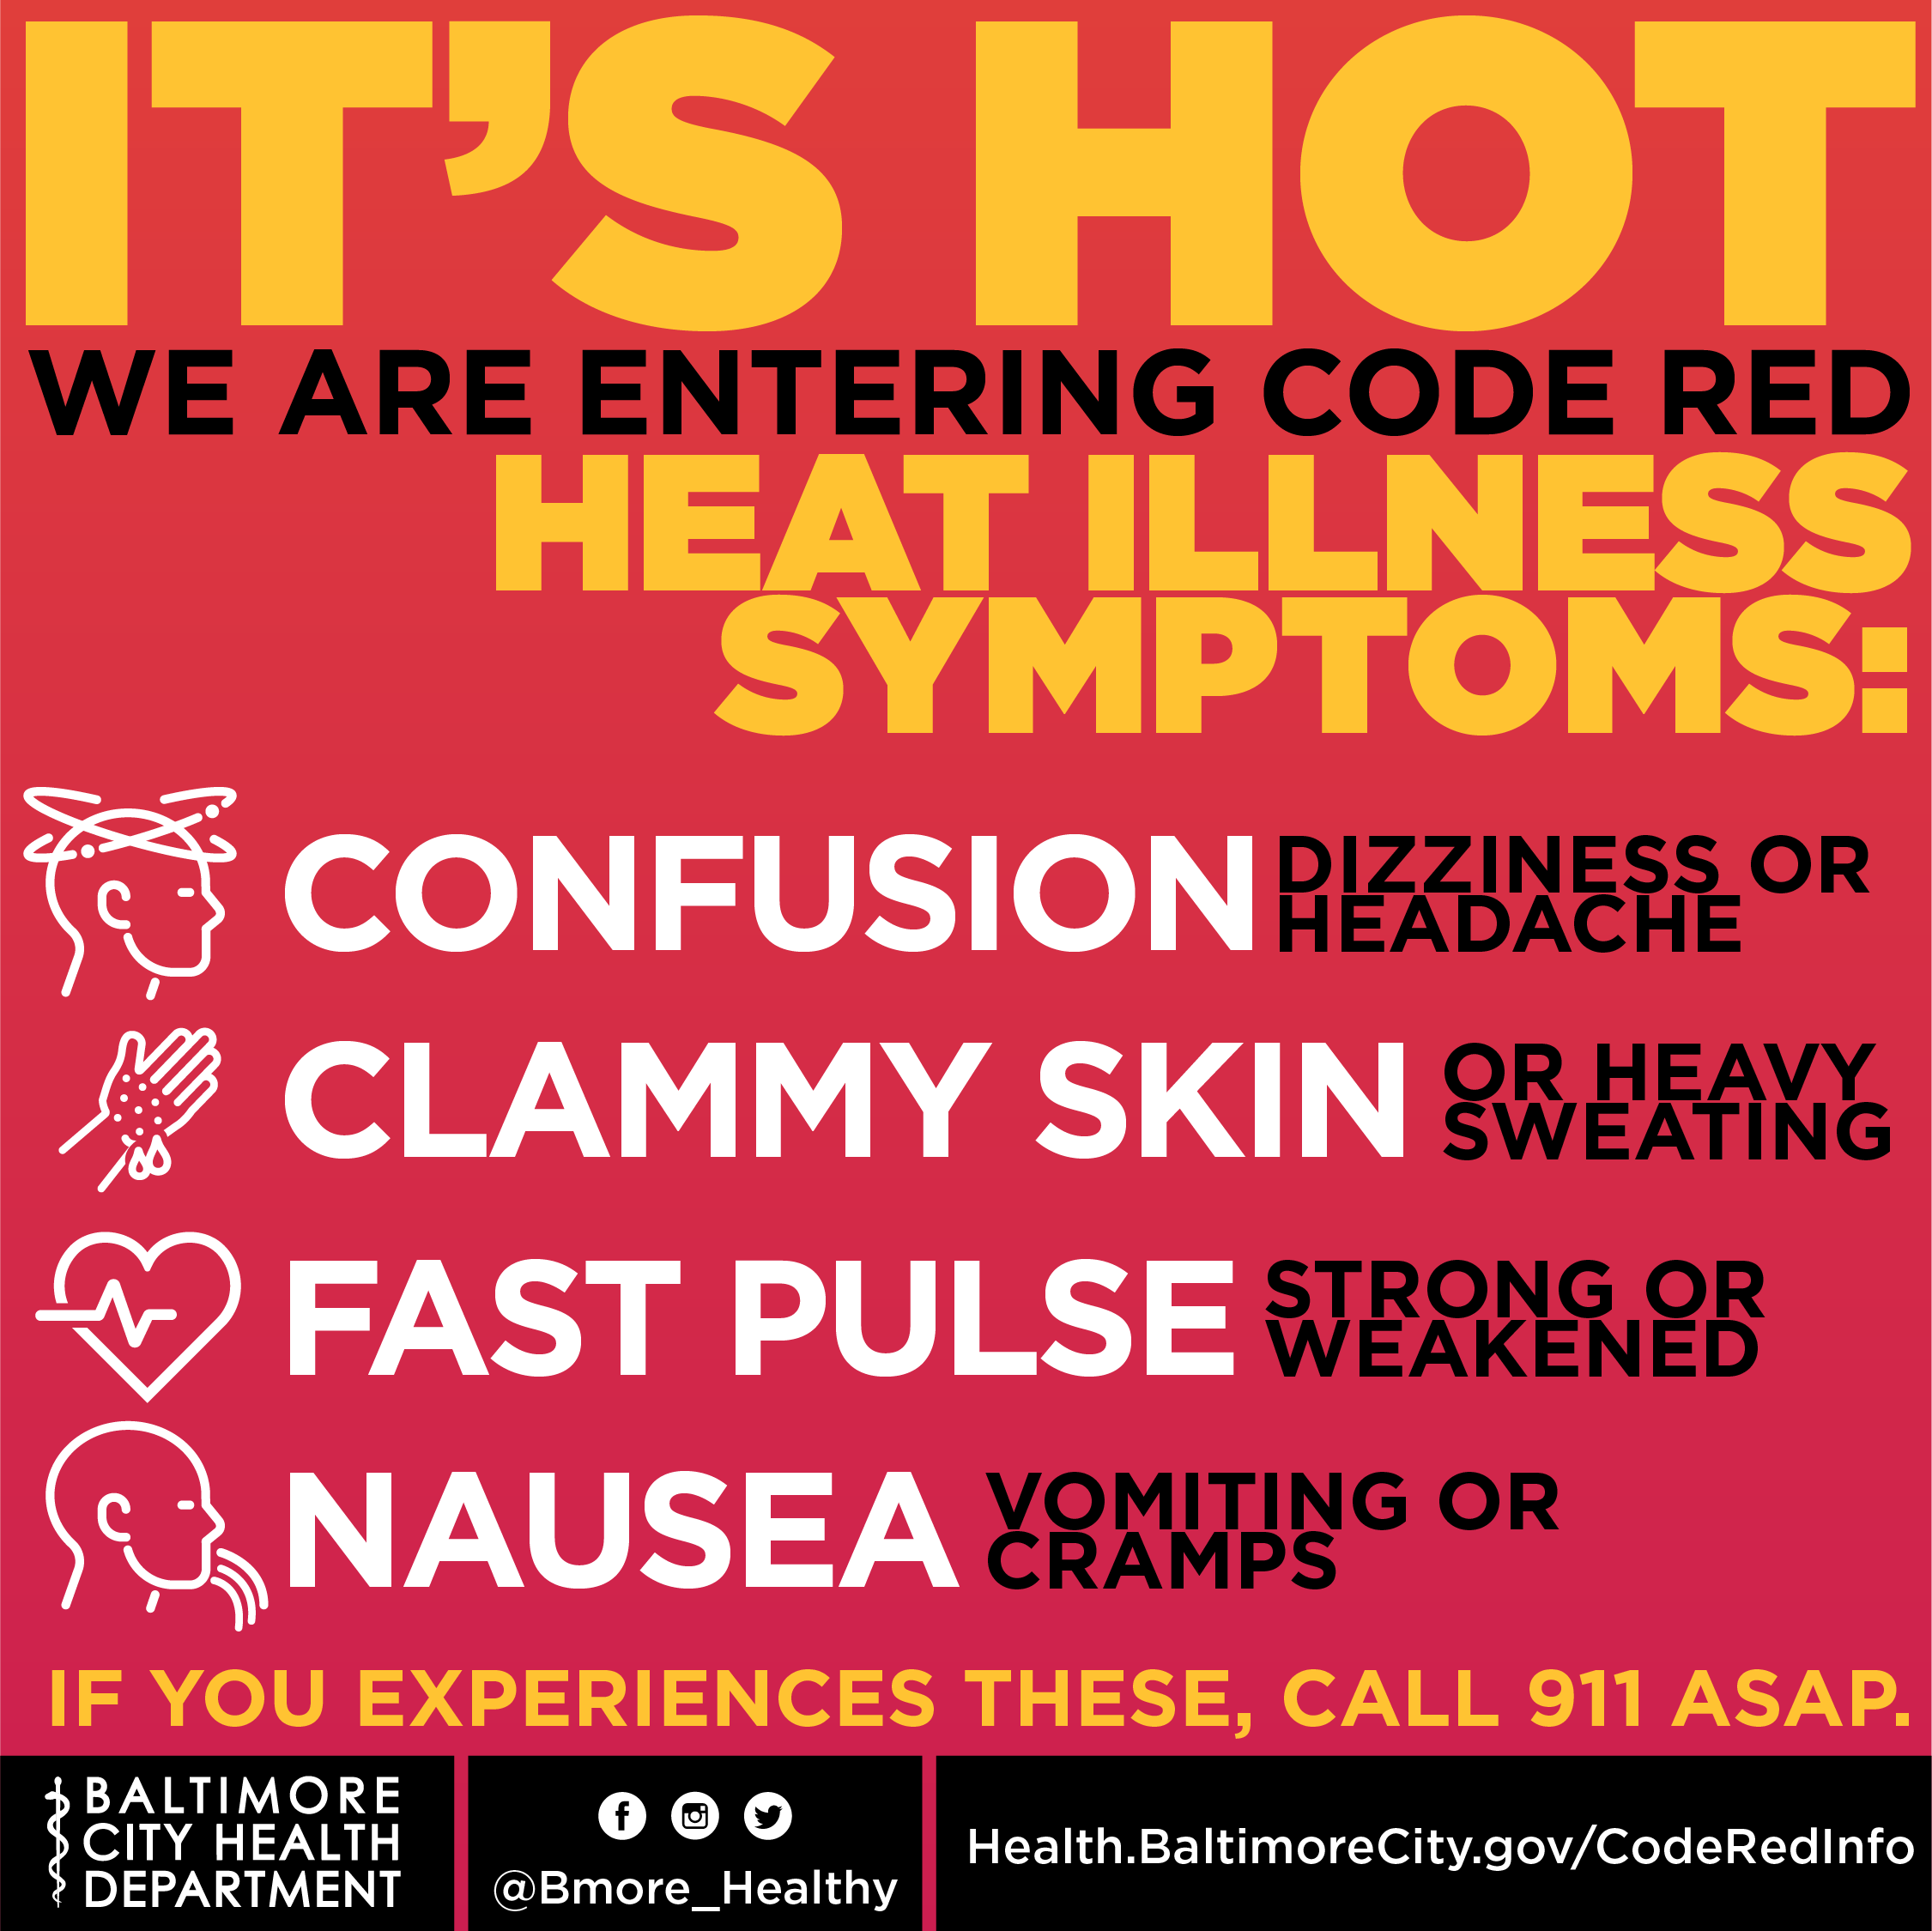 Its Hot! We are entering Code Red. Heat Illness symptoms include confusion, dizziness, headache, clammy skin, heavy sweating, and a fast pulse. If you experience these, call 911 asap. 